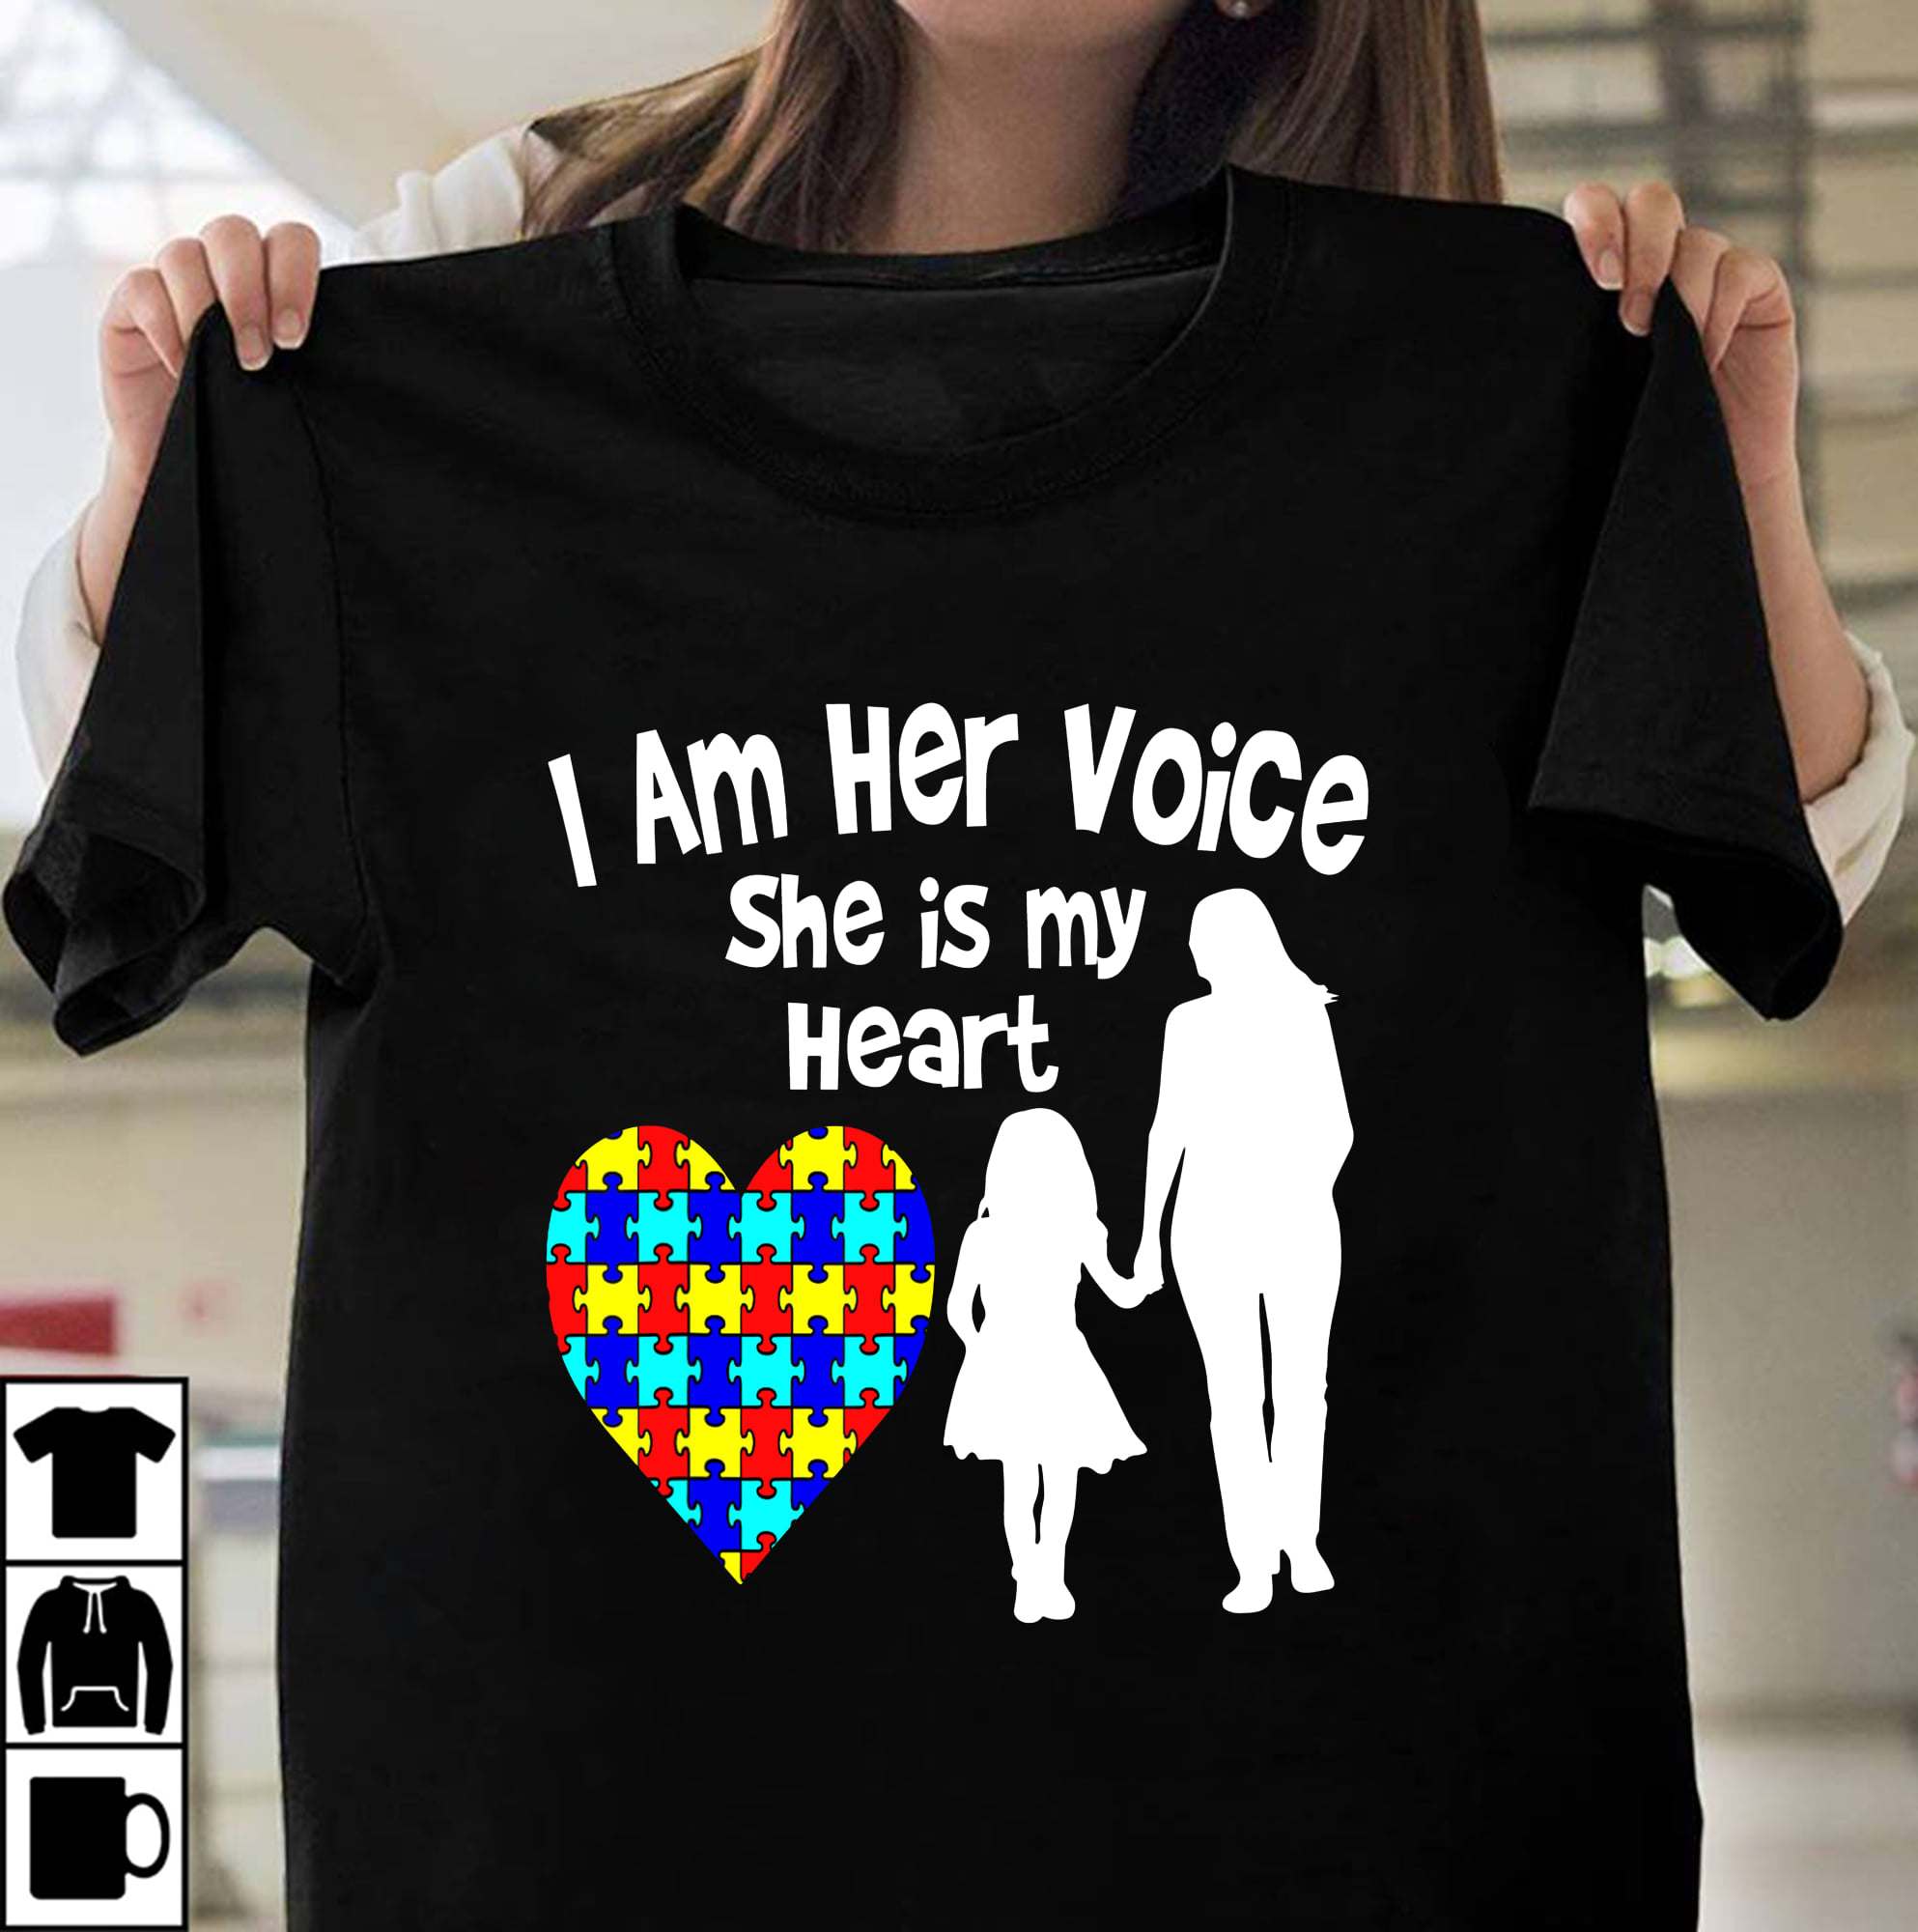 I am her voice she is my heart - Mother and daughter, autism awareness